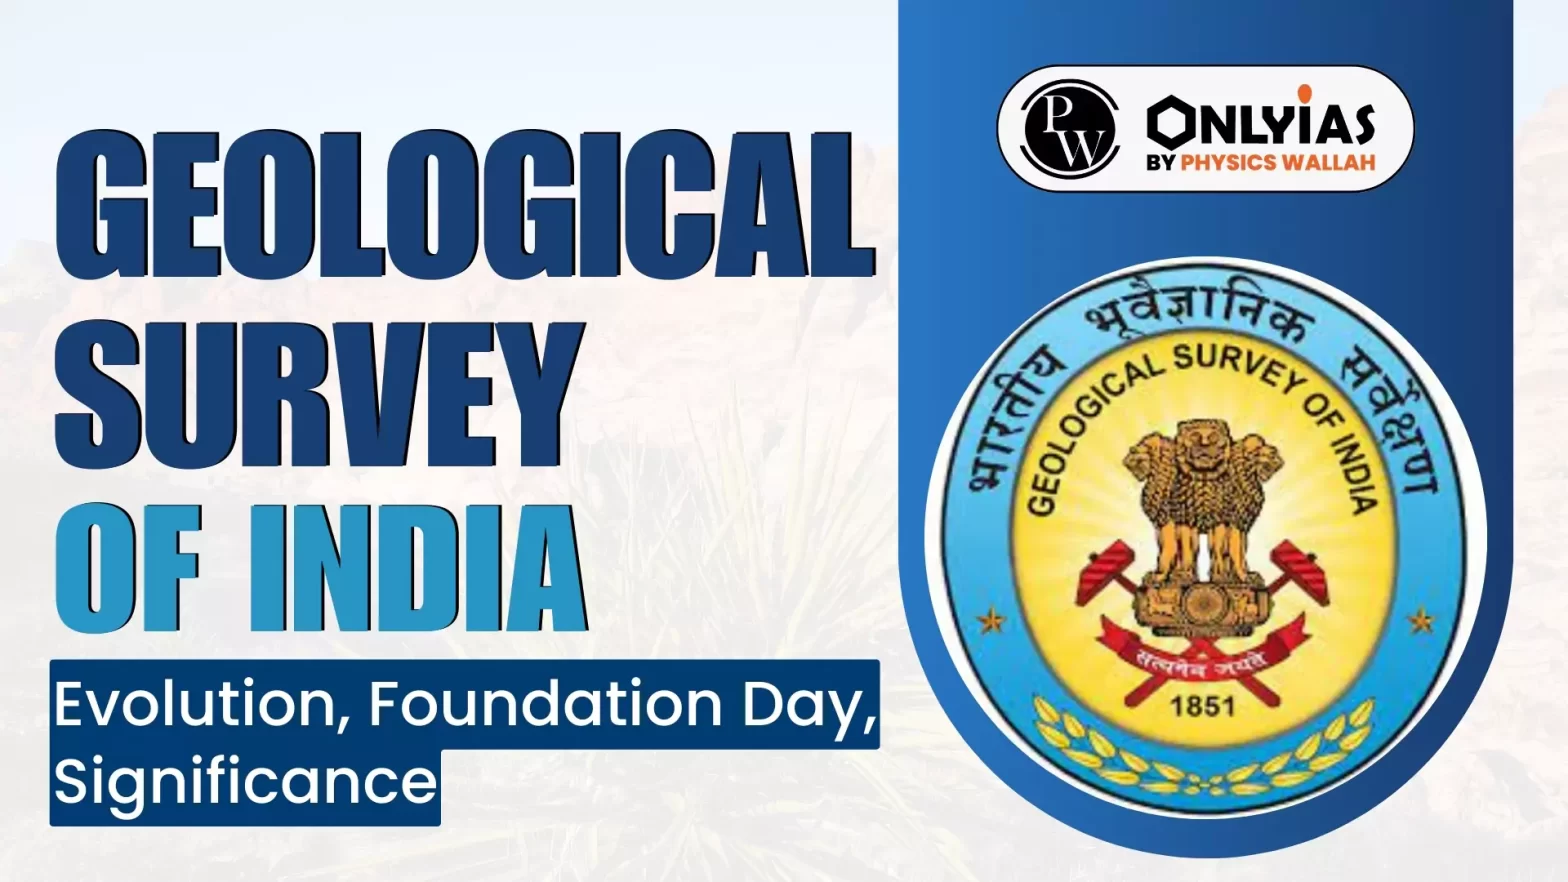 Geological Survey of India: Evolution, Foundation Day, Significance